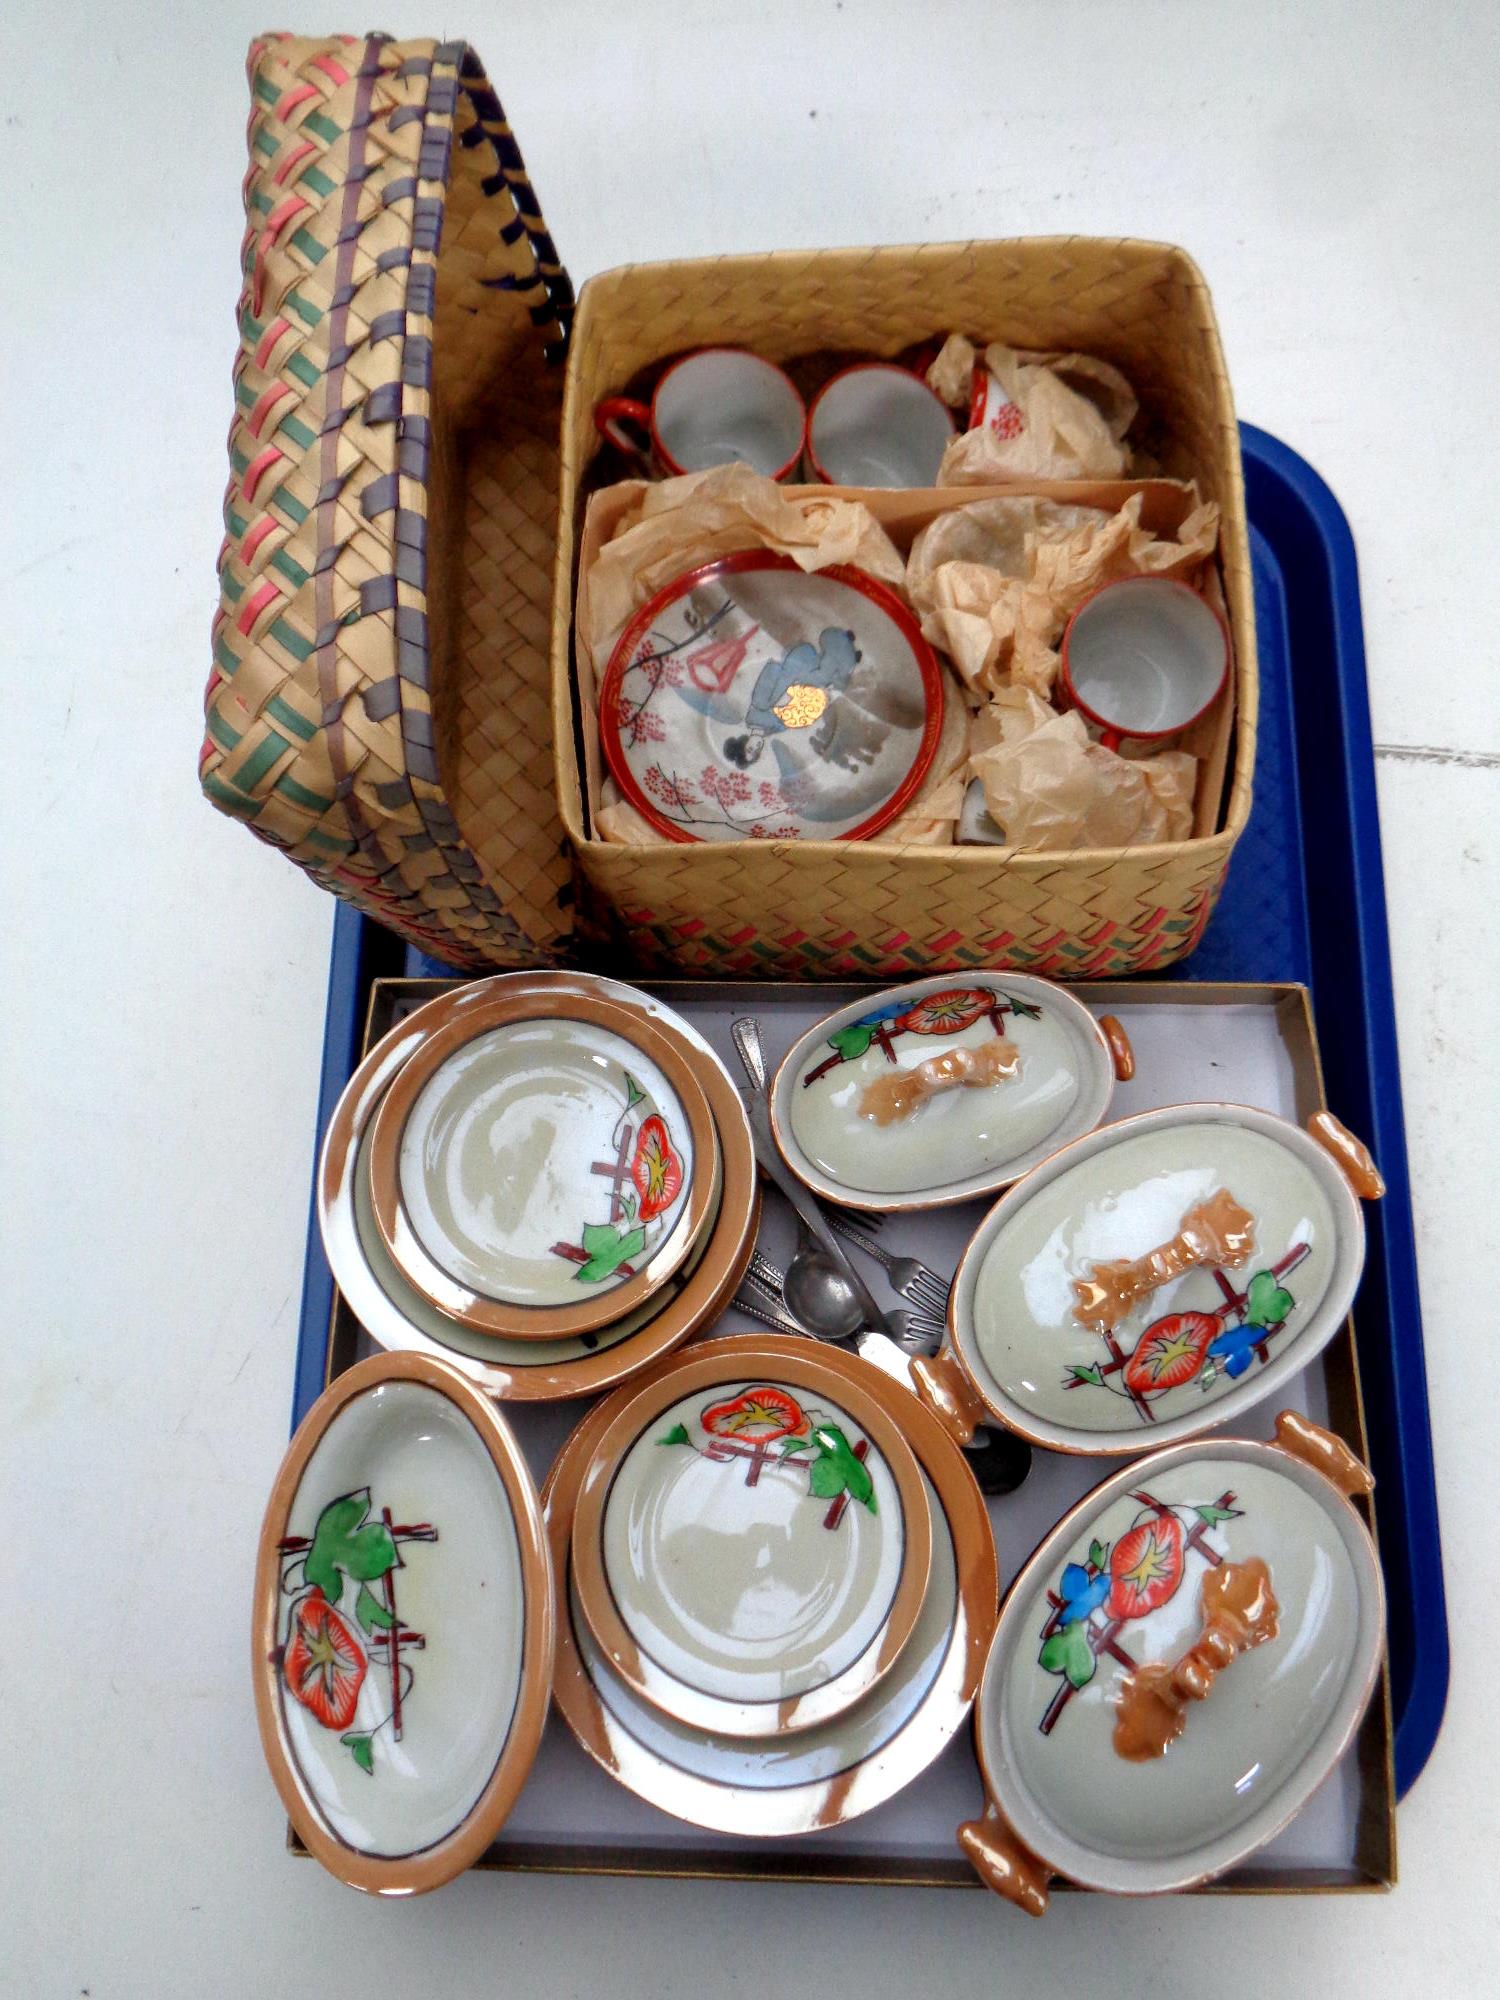 A Japanese eggshell tea service in wicker box together with a miniature Japanese export dinner